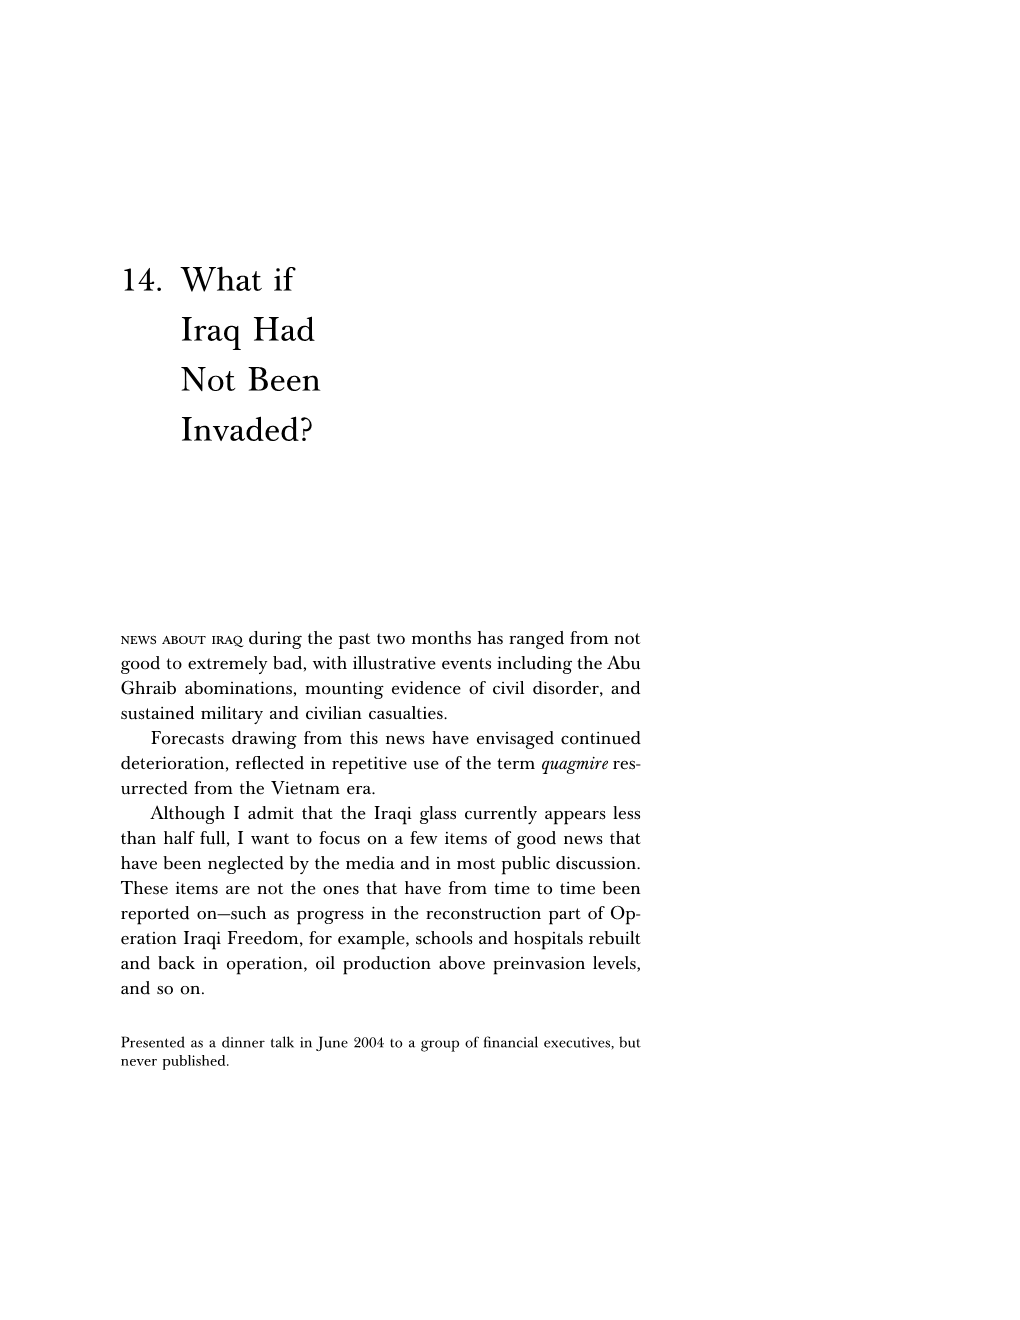 14. What If Iraq Had Not Been Invaded?